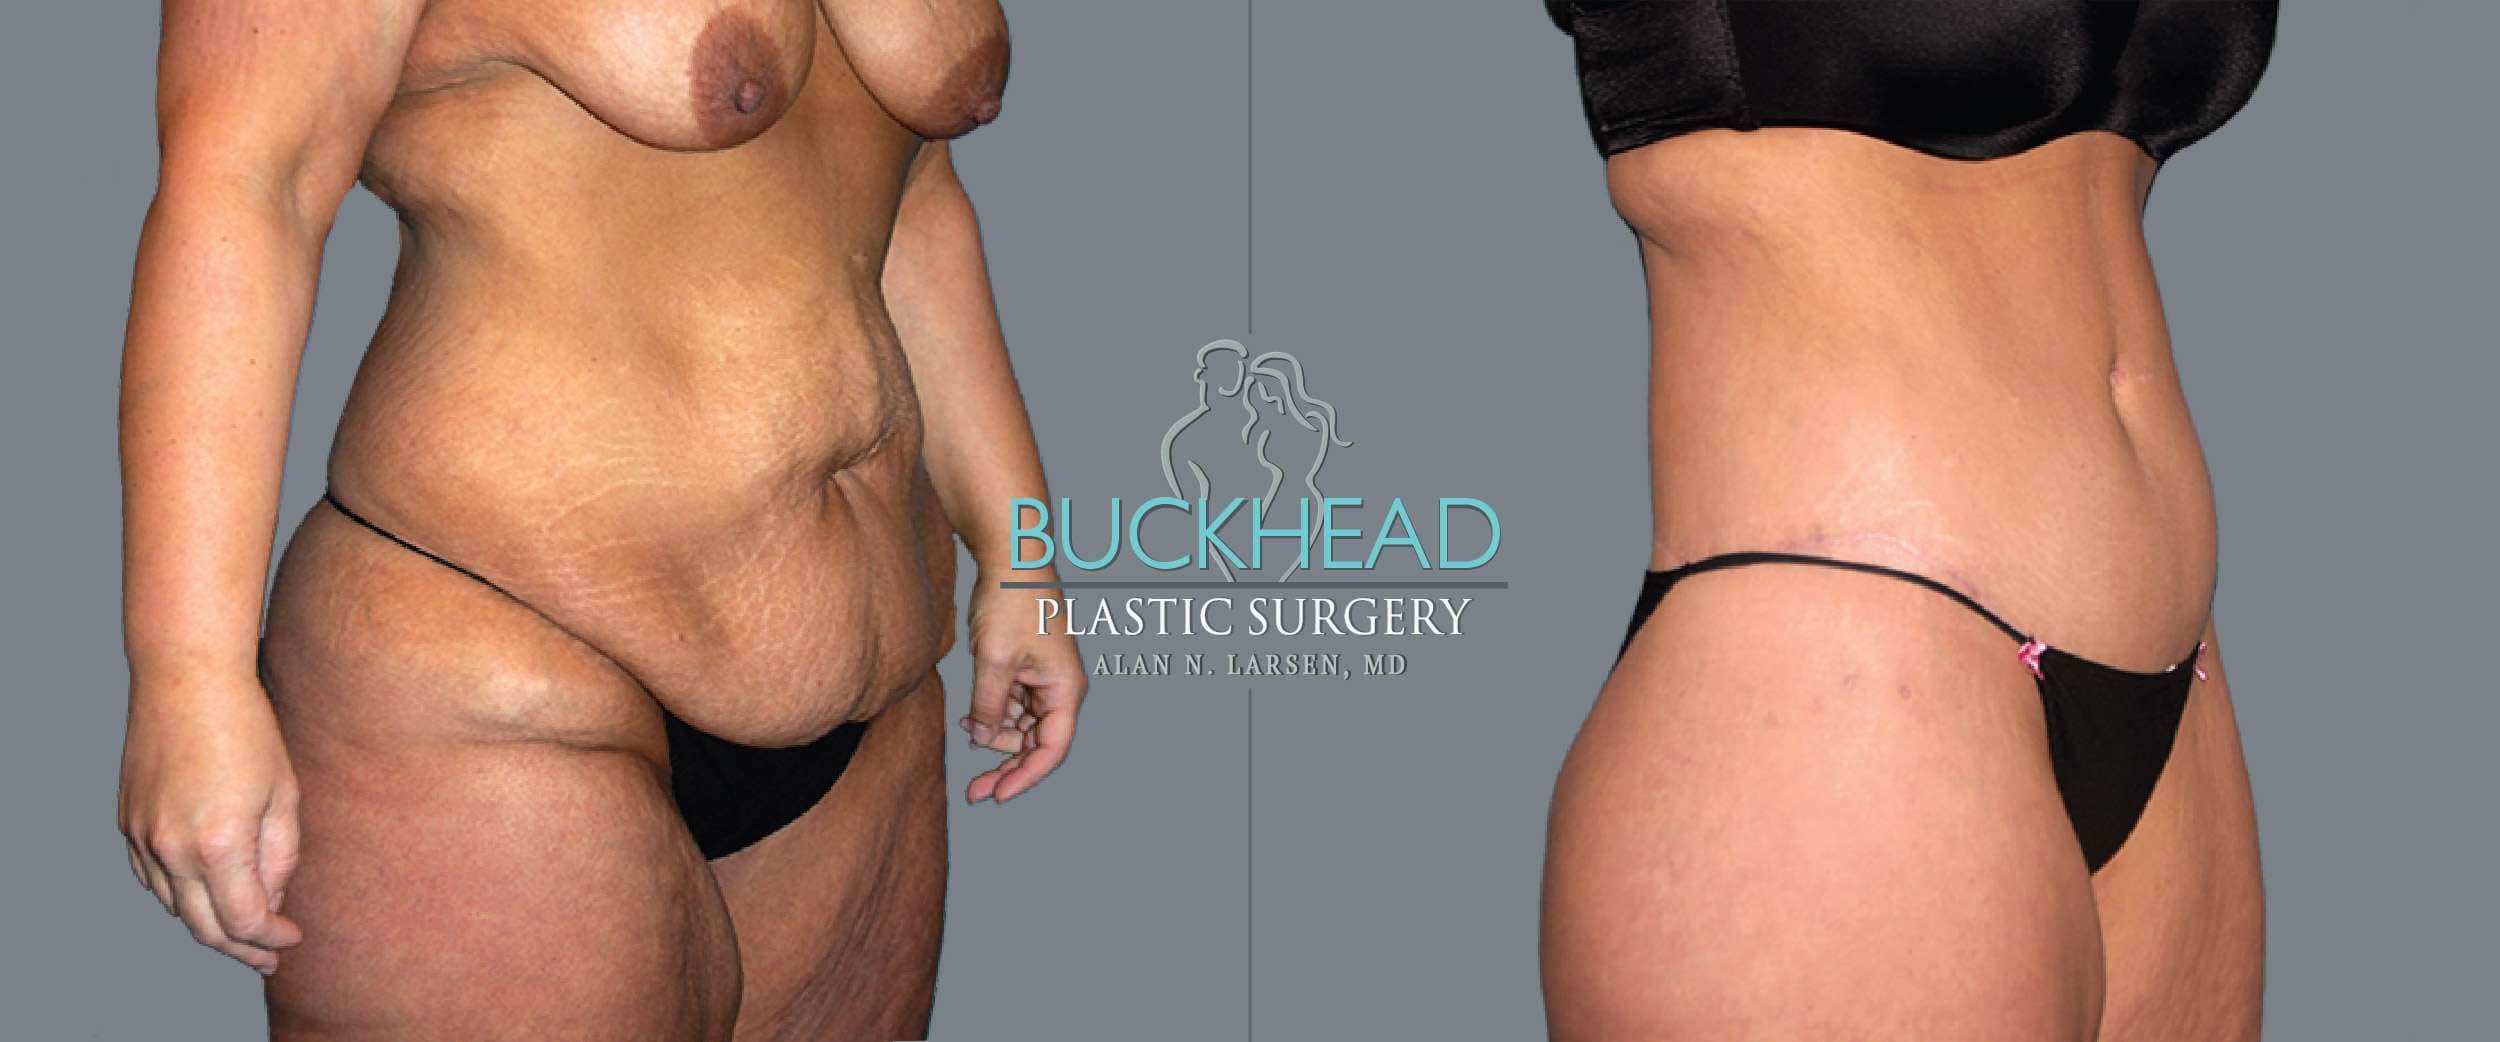 Before and After Photo gallery | Tummy Tuck | Buckhead Plastic Surgery | Double Board-Certified Plastic Surgeon in Atlanta GA